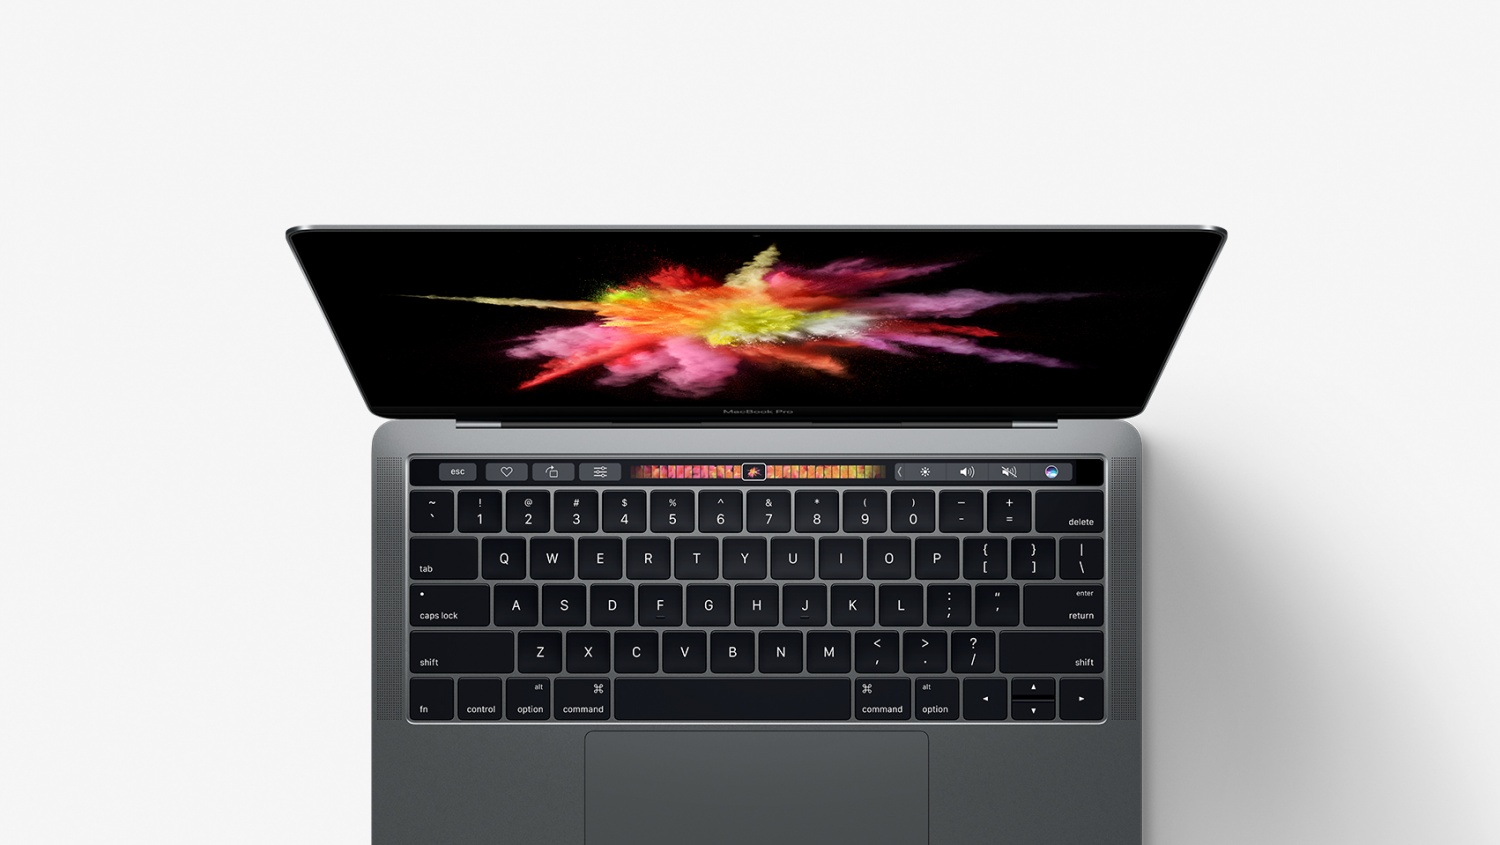 Apple will soon be revealing their replacement to their current model, a new 16-inch MacBook Pro.